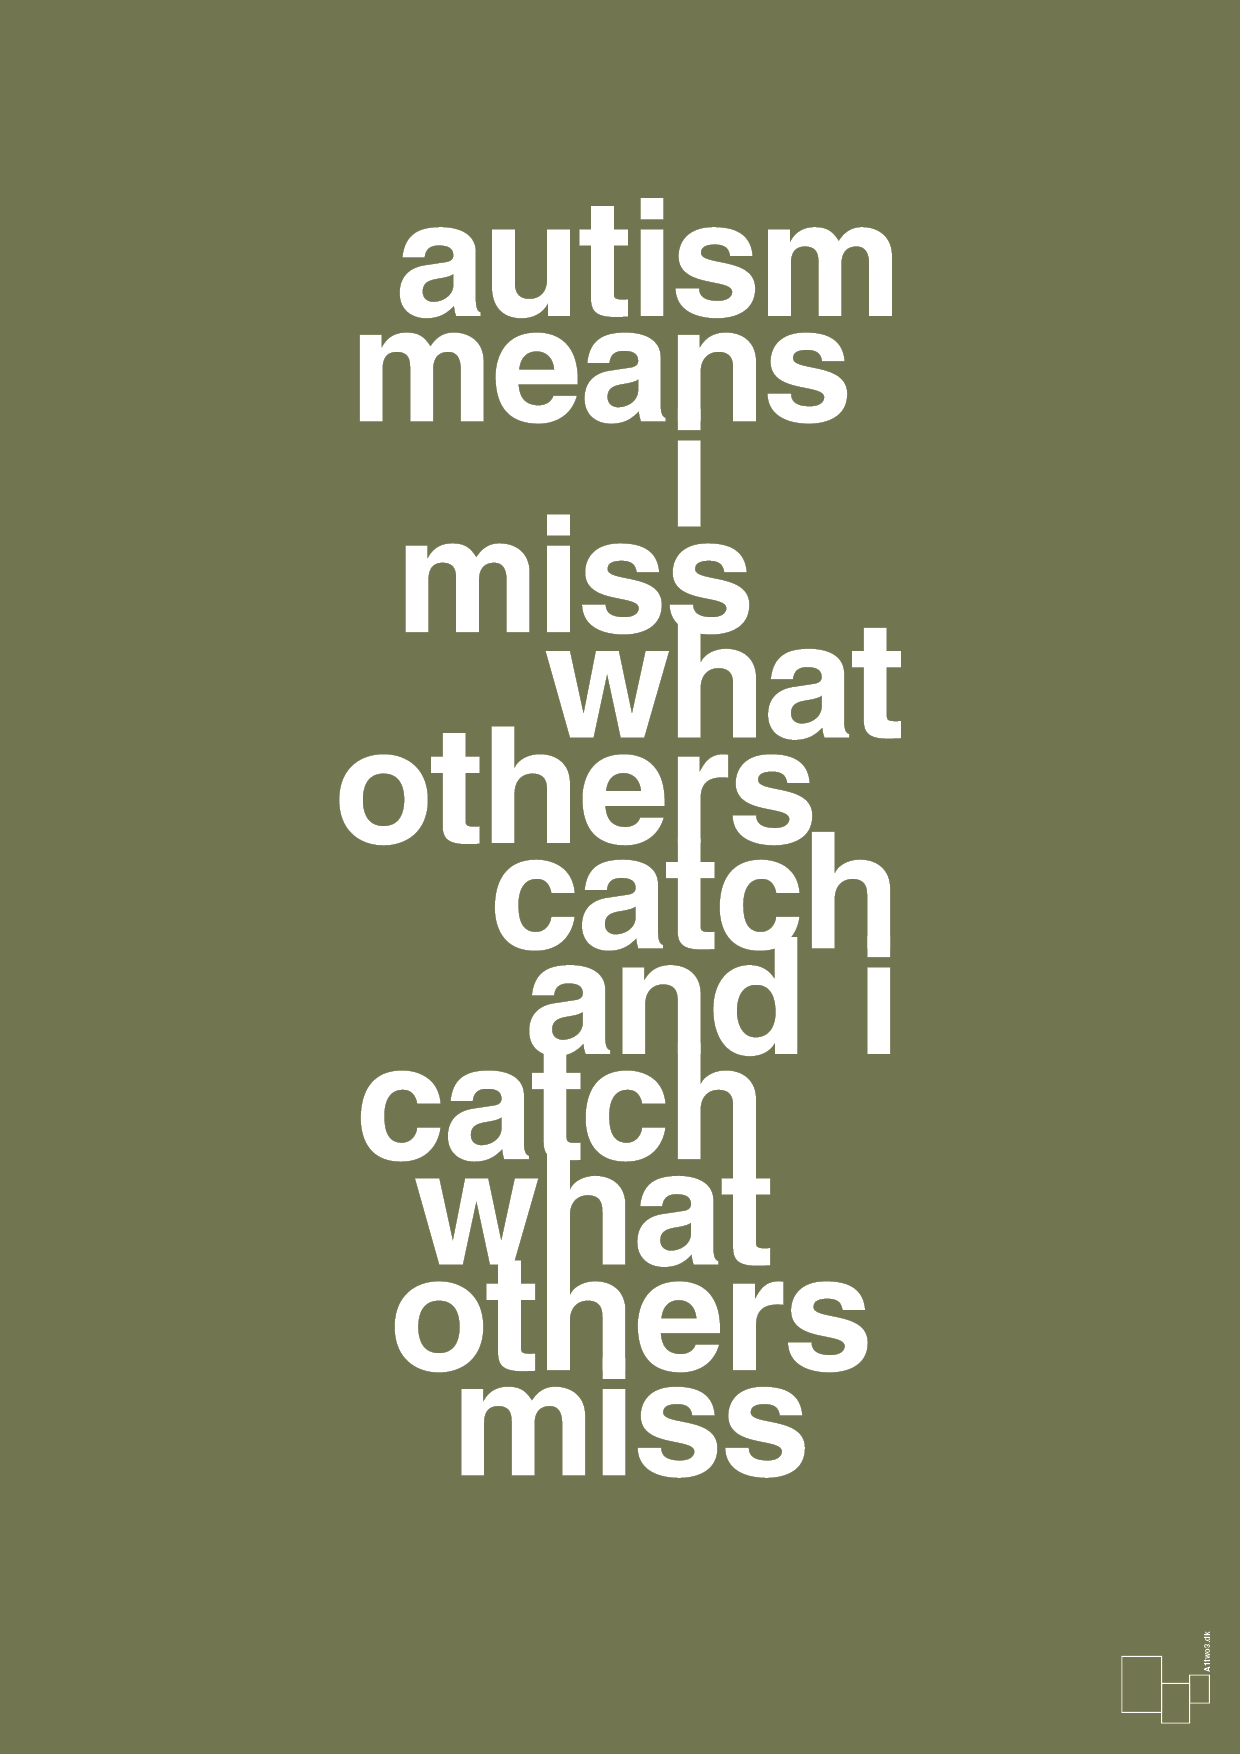 autism means i miss what others catch and i catch what others miss - Plakat med Samfund i Secret Meadow